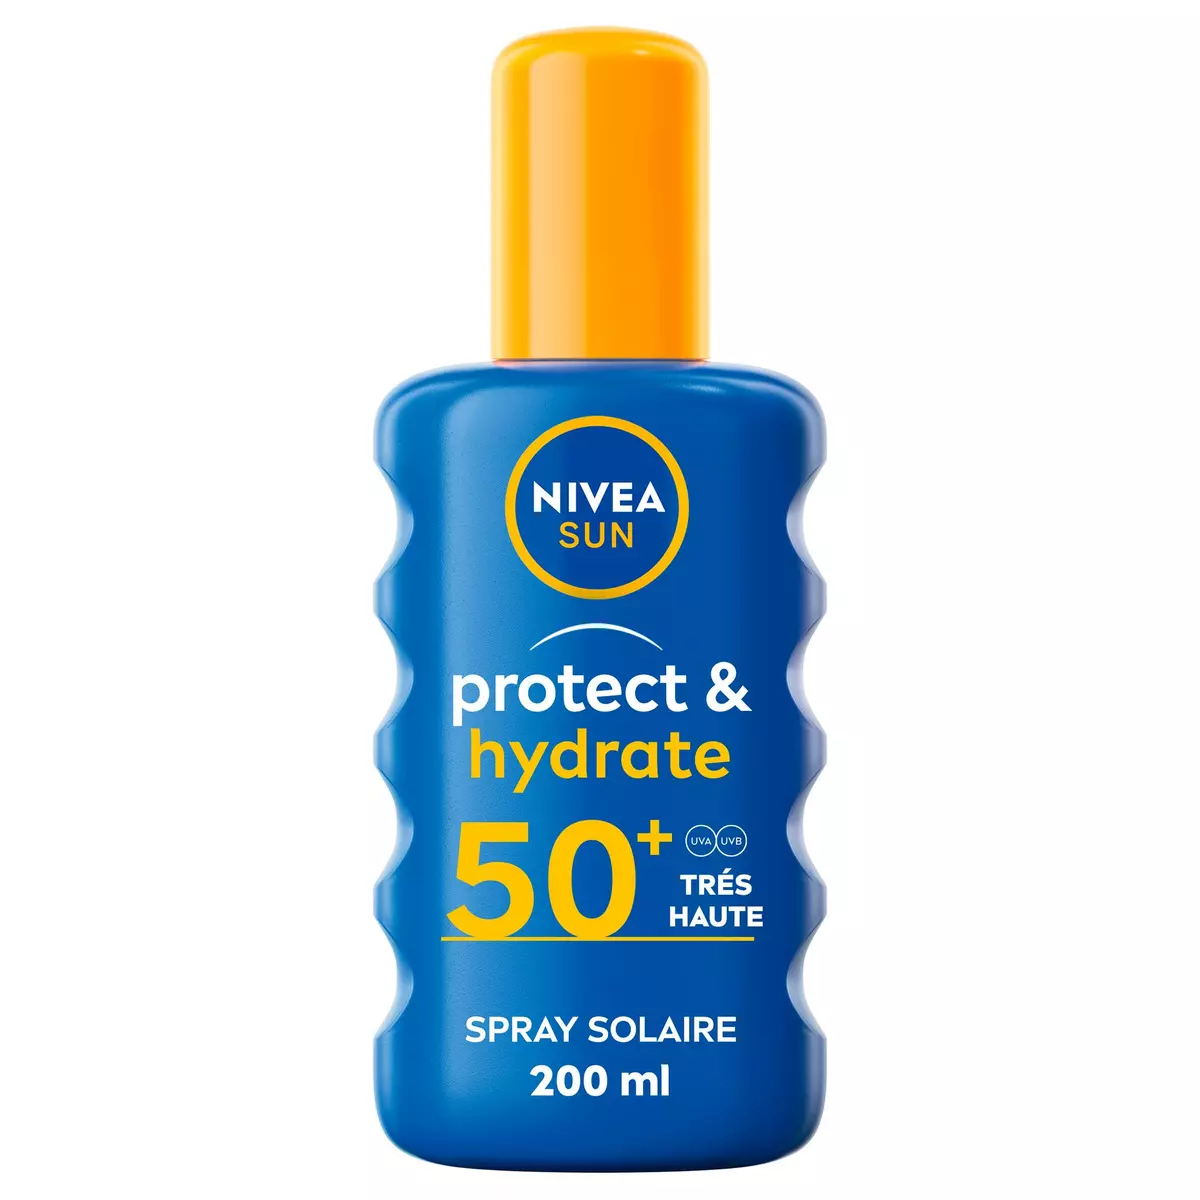 NIVEA SUN Protect & Hydrate Spray protection 48h FPS50+ 200ml